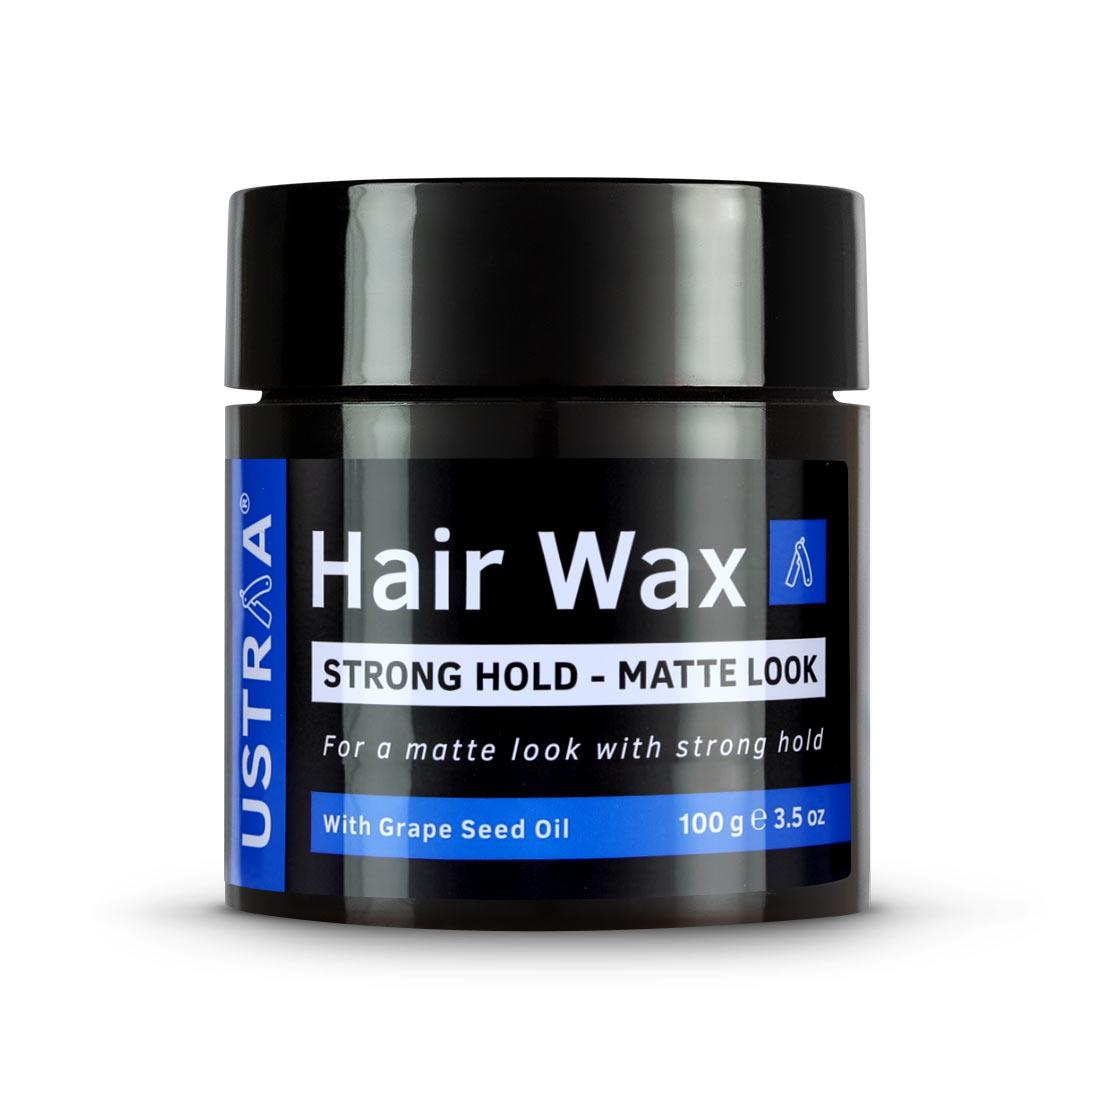 Strong Hold with Matte Look | No Harmful Chemicals |Hair Wax Matte Look  |Ustraa